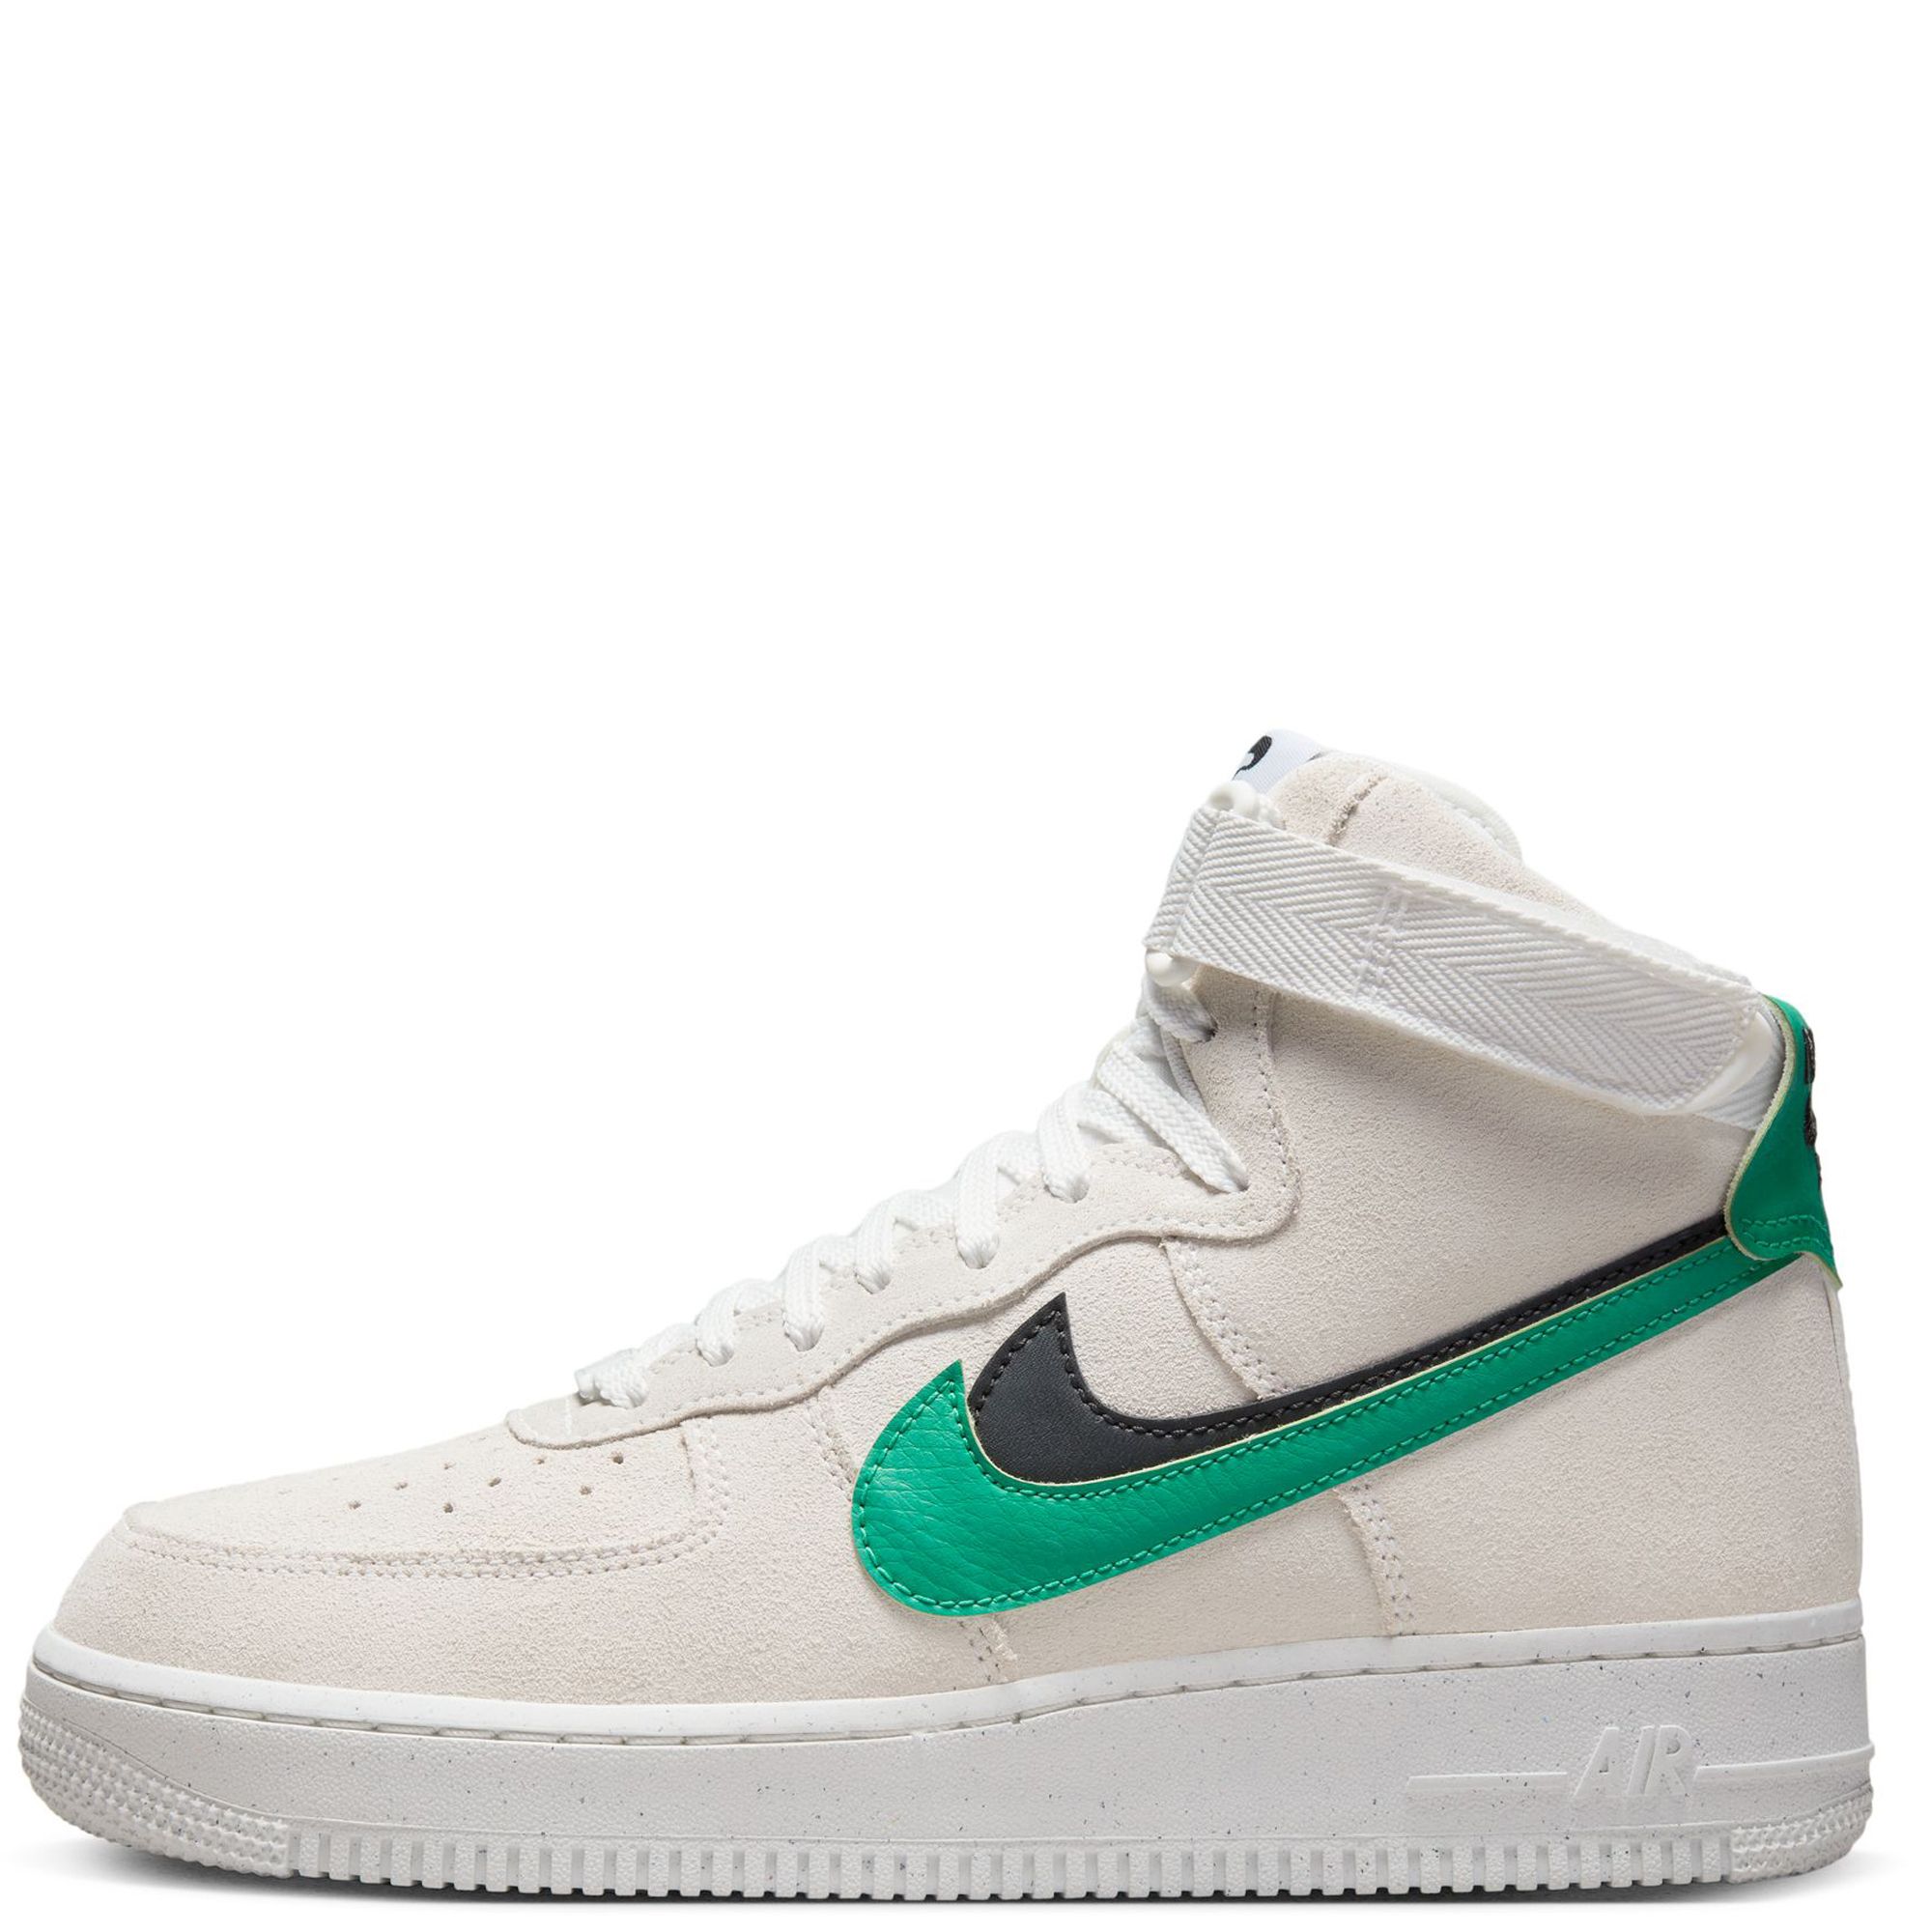 Nike Women's Air Force 1 High SE Shoes in White, Size: 7.5 | DO9460-100